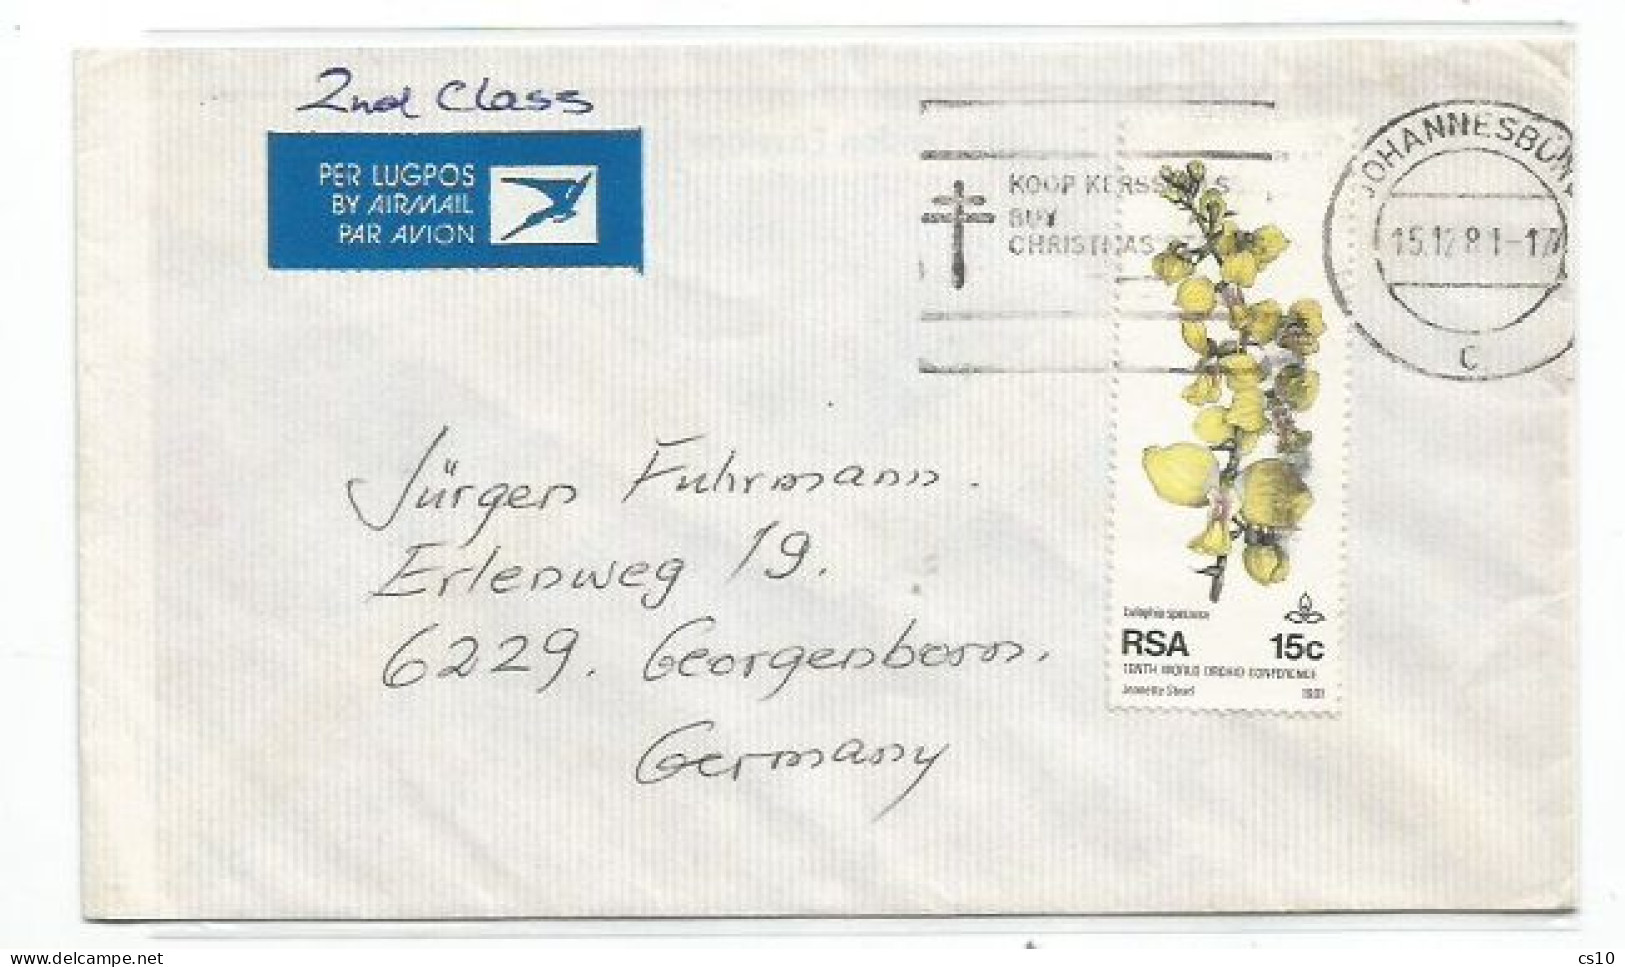 Orchid Eulophia Speciosa South Africa Issue C.15 Solo Franking 2nd Class Airmail Cover Johannesburg 15dec1981 X Germany - Orquideas